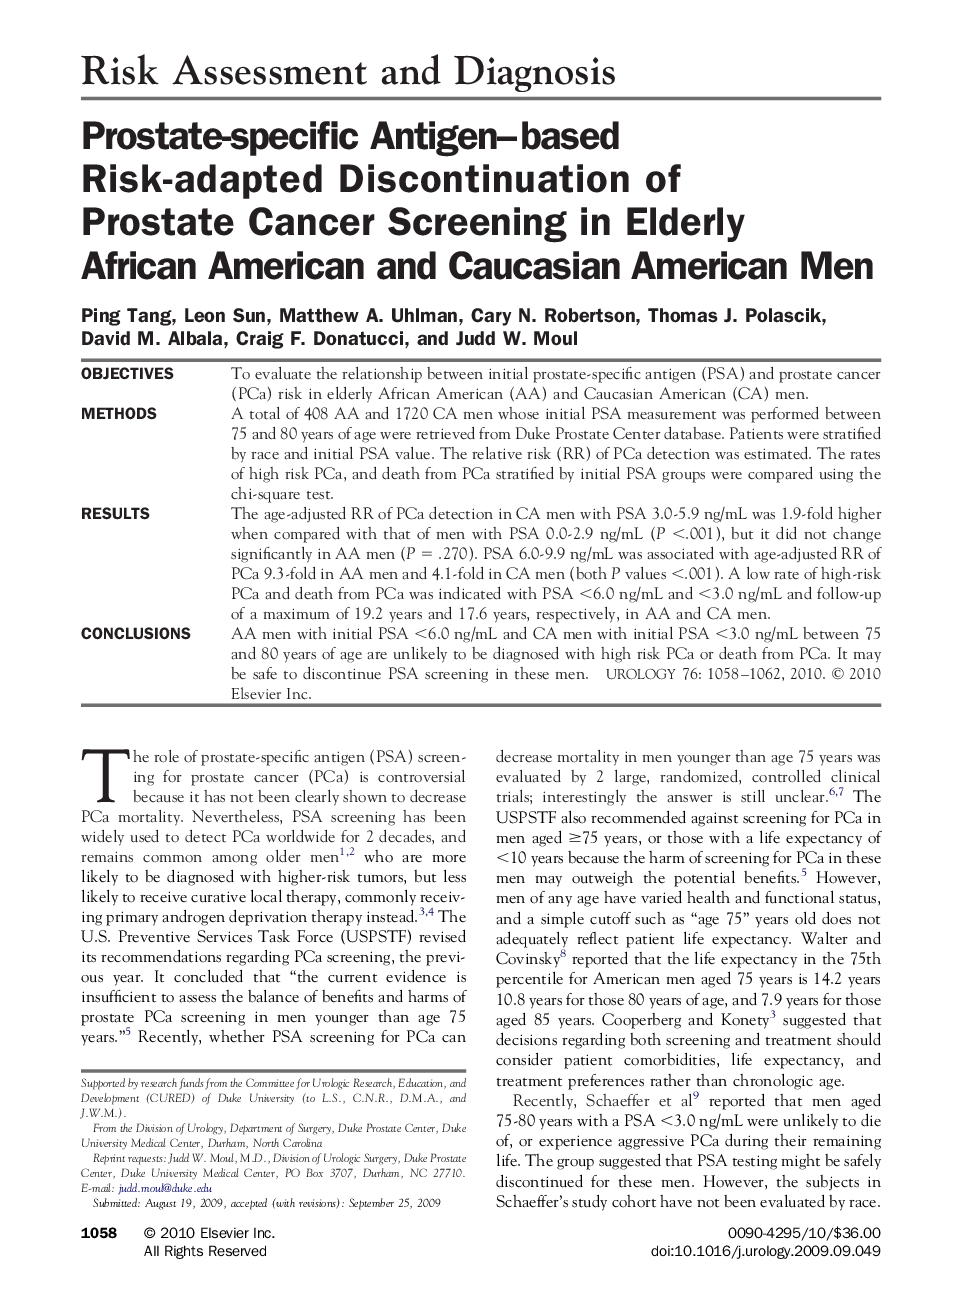 Prostate-specific Antigen–based Risk-adapted Discontinuation of Prostate Cancer Screening in Elderly African American and Caucasian American Men 